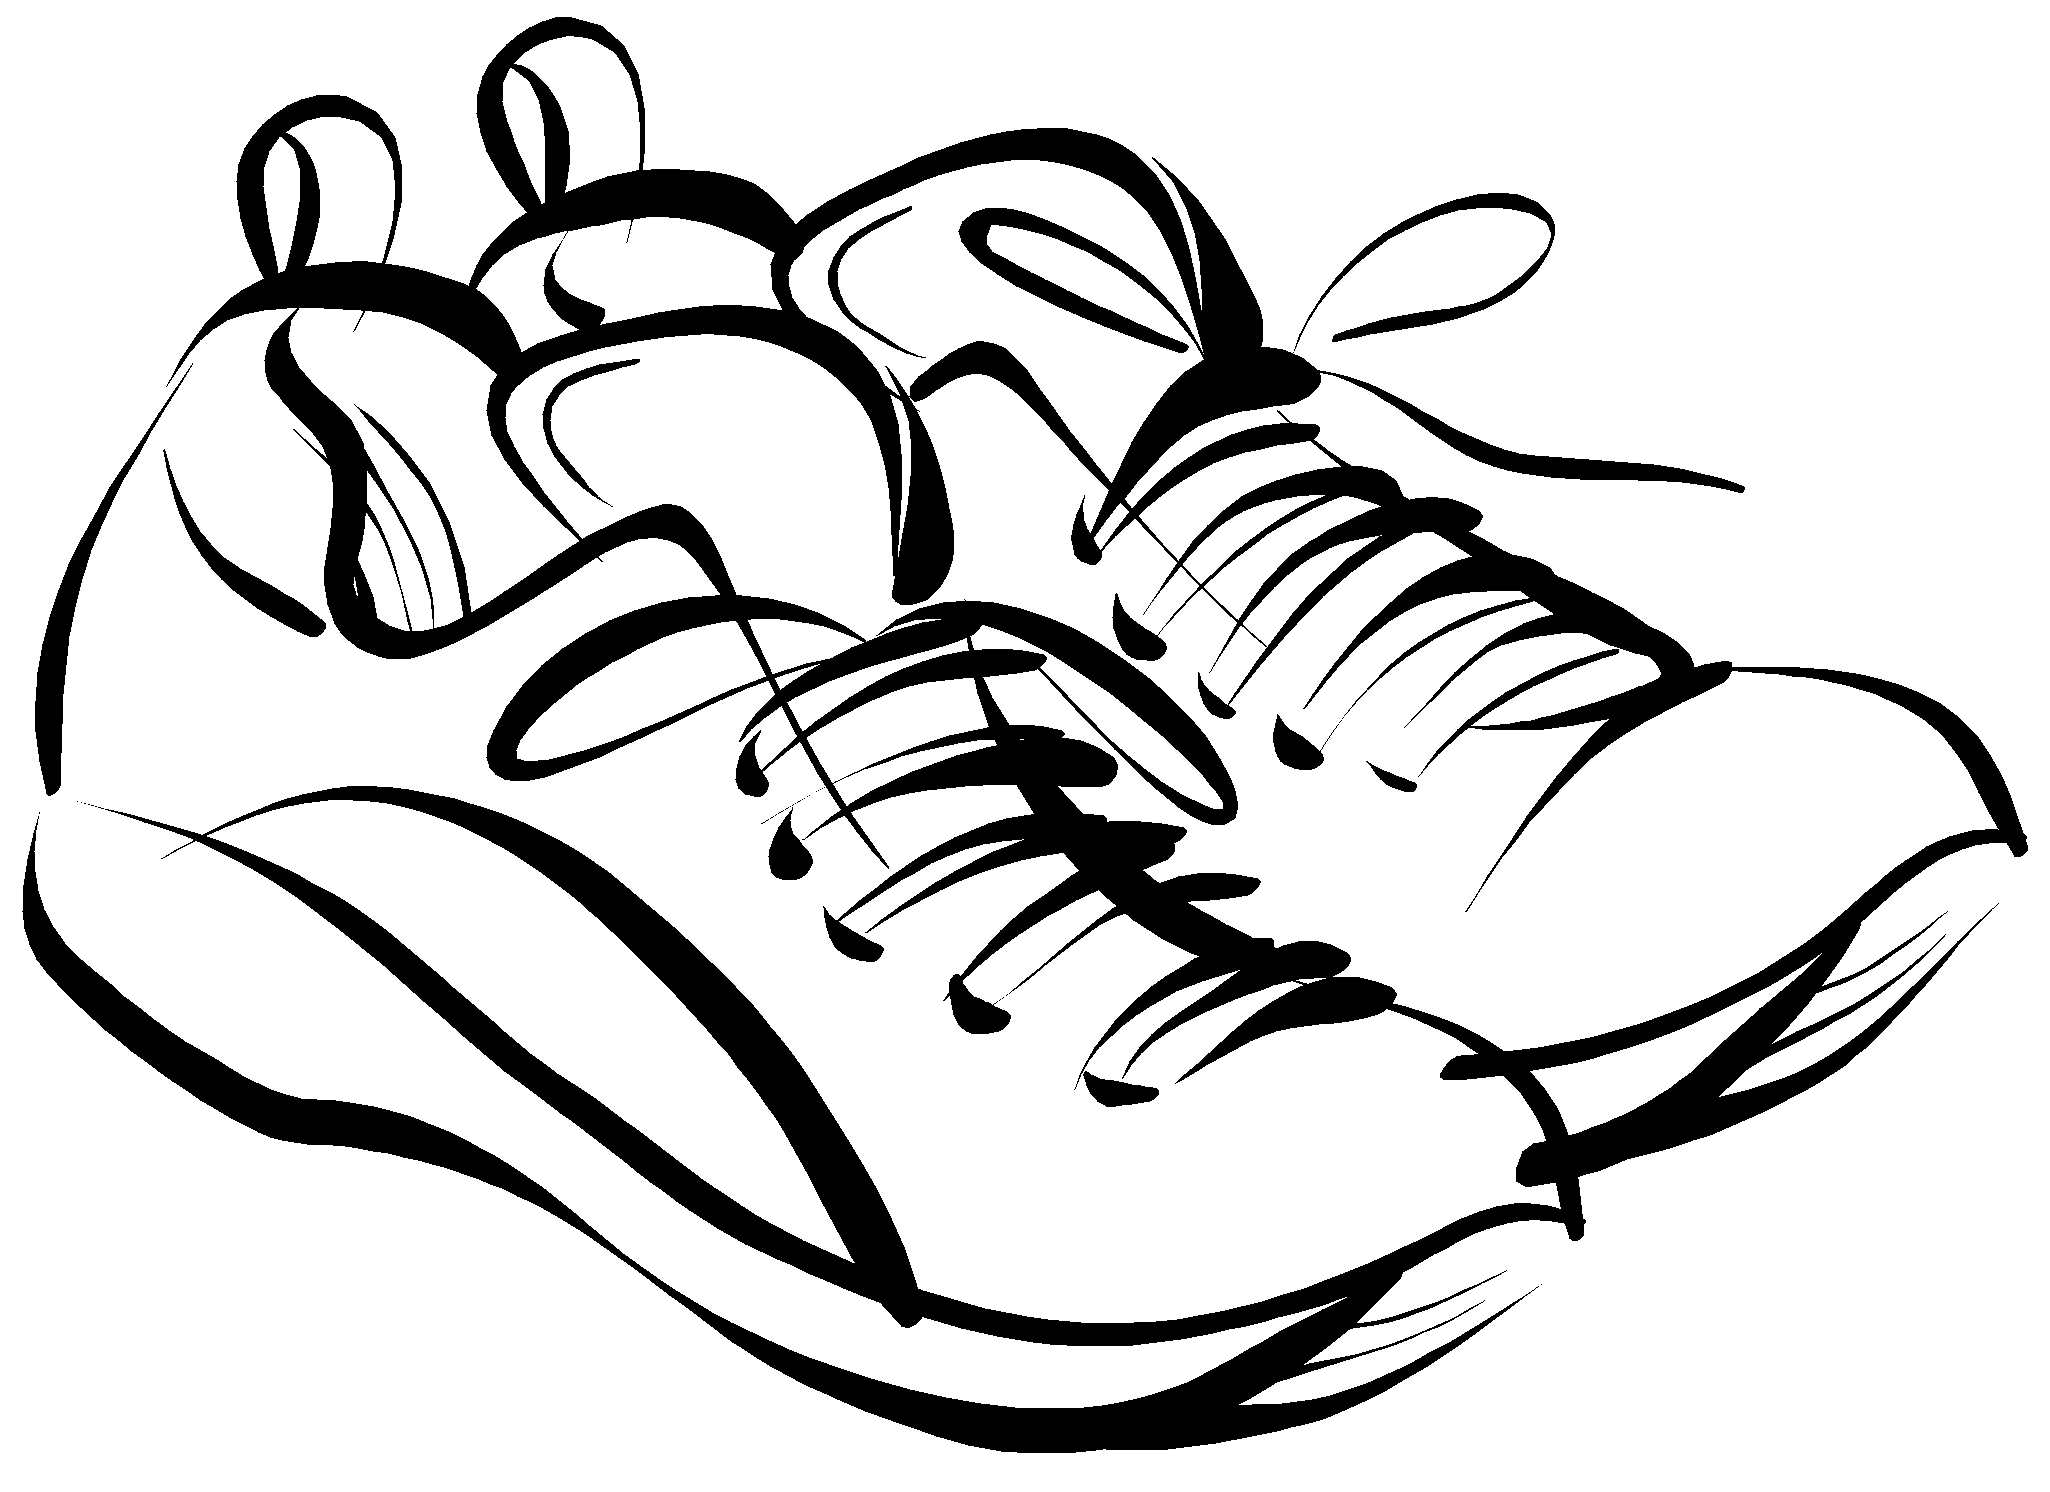 free clipart images running shoes - photo #37